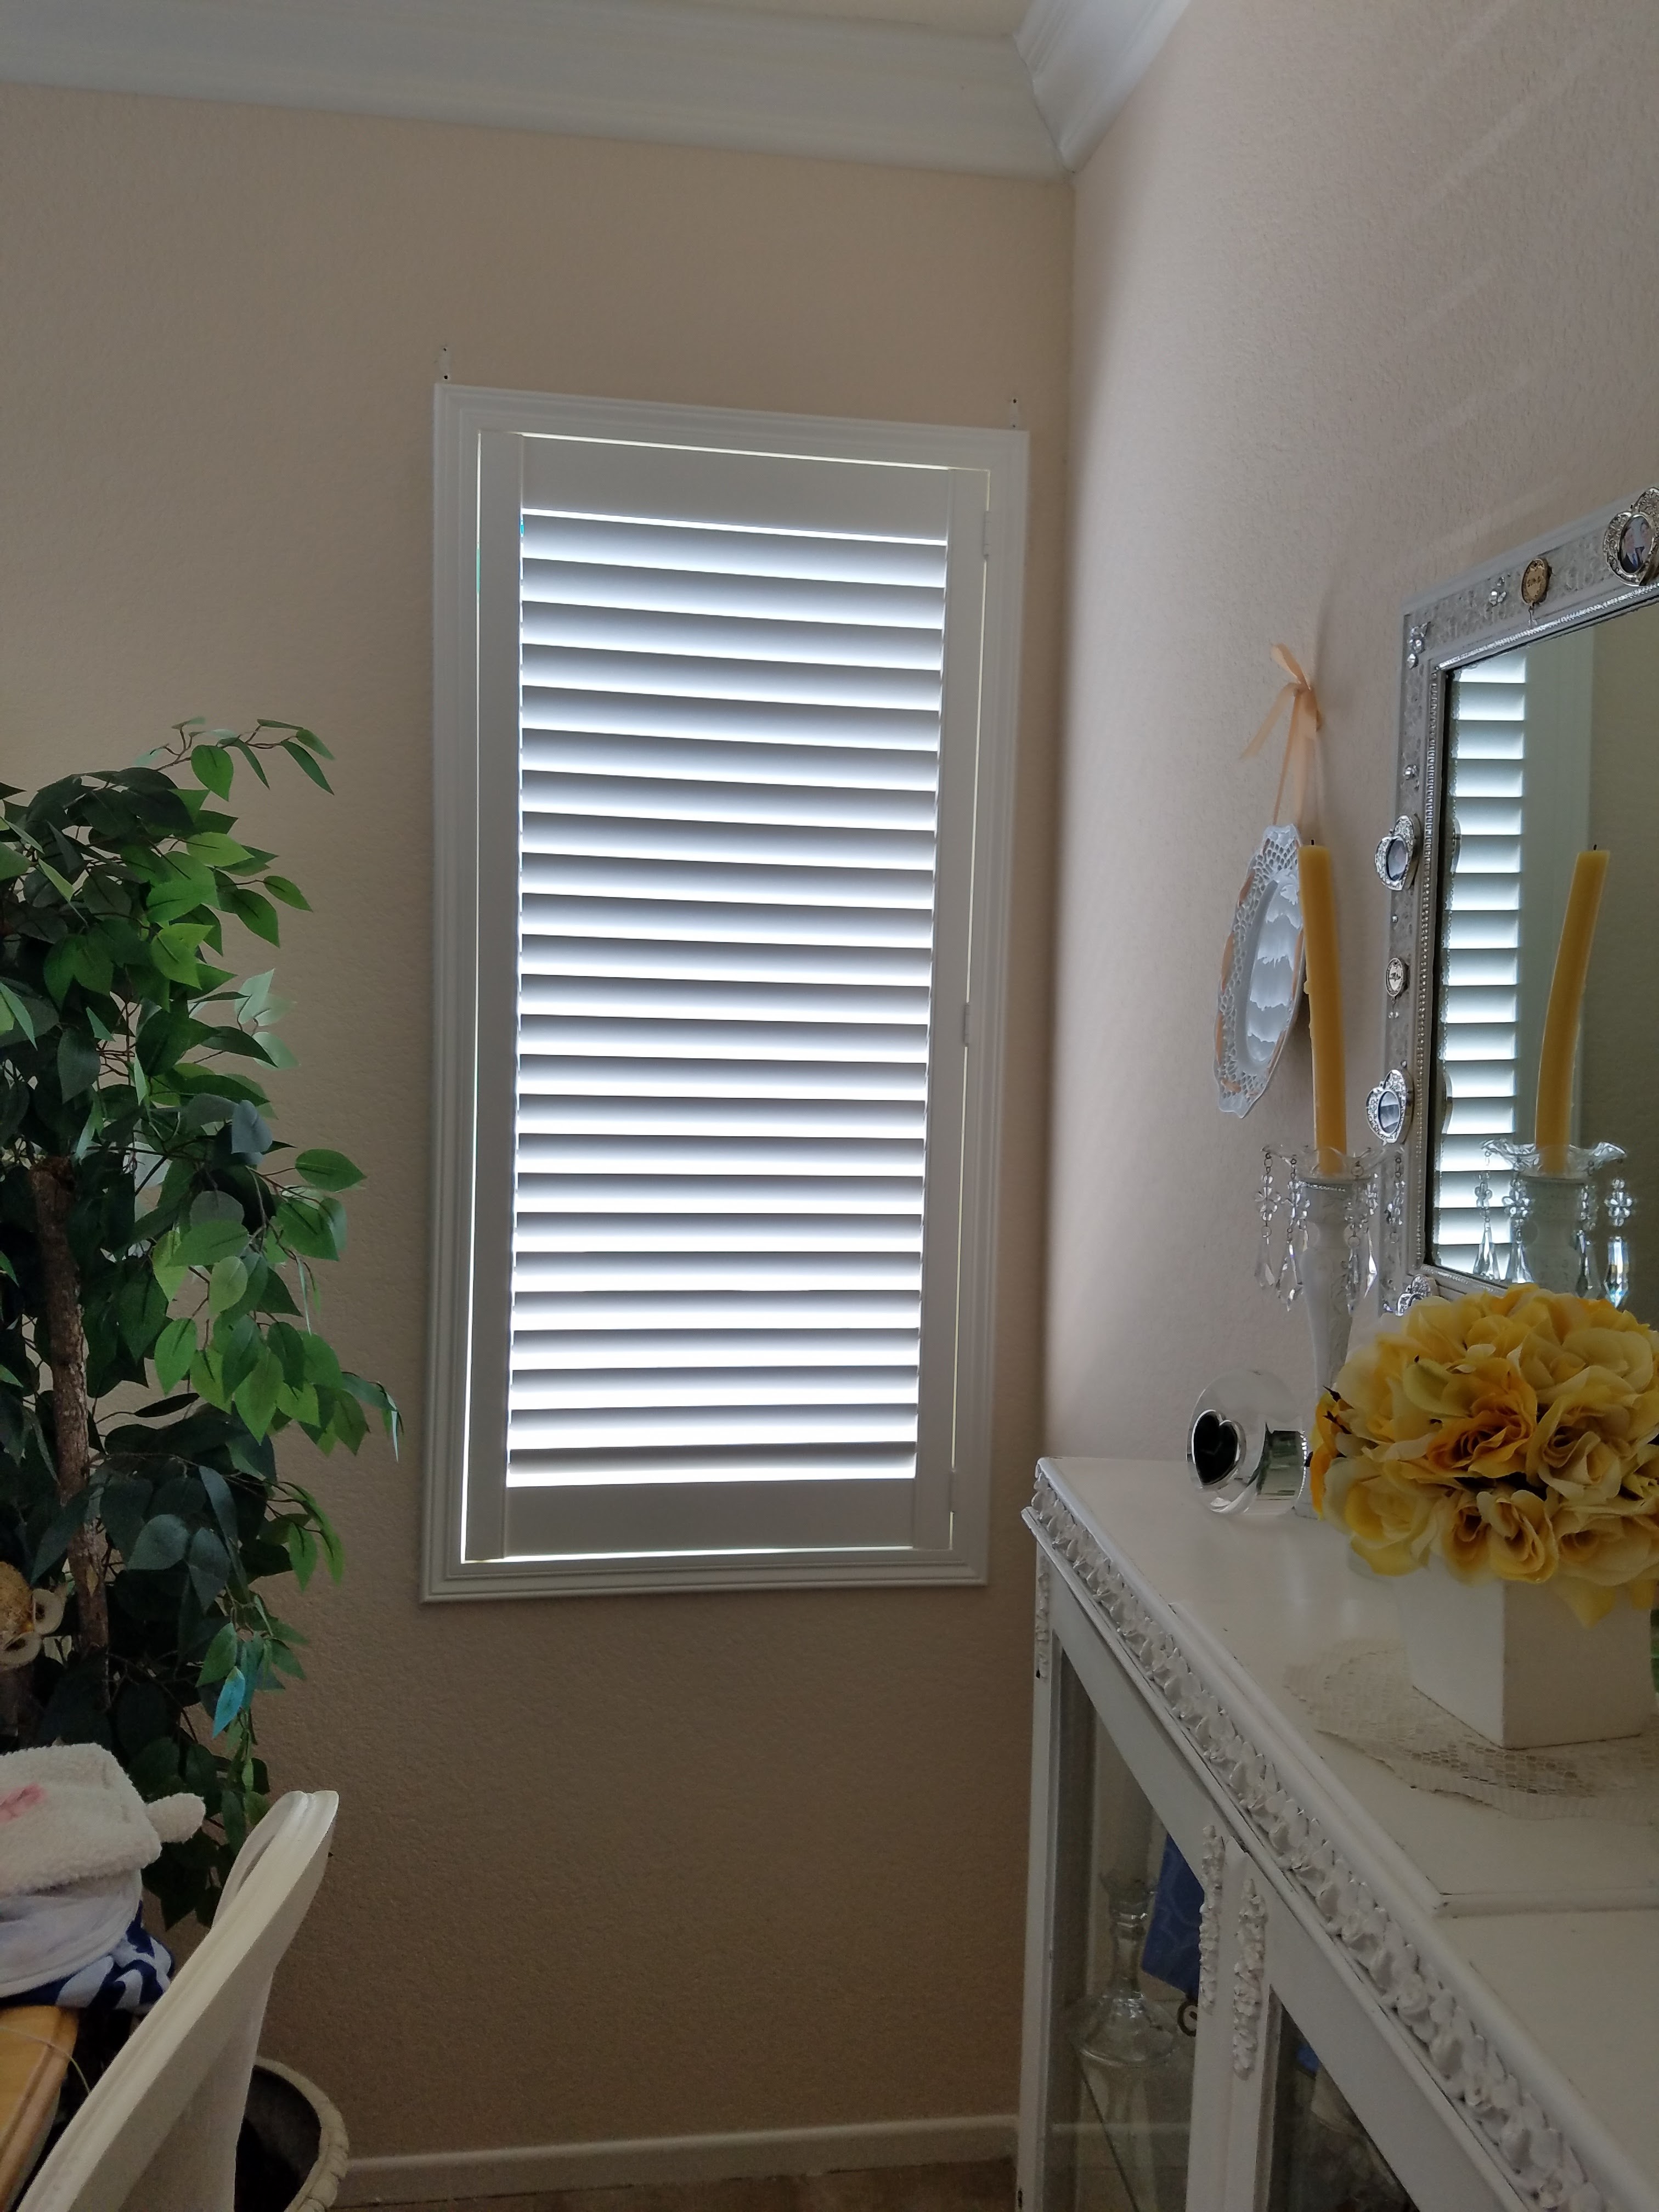 Image 22 | 805 Shutters Shades & Blinds